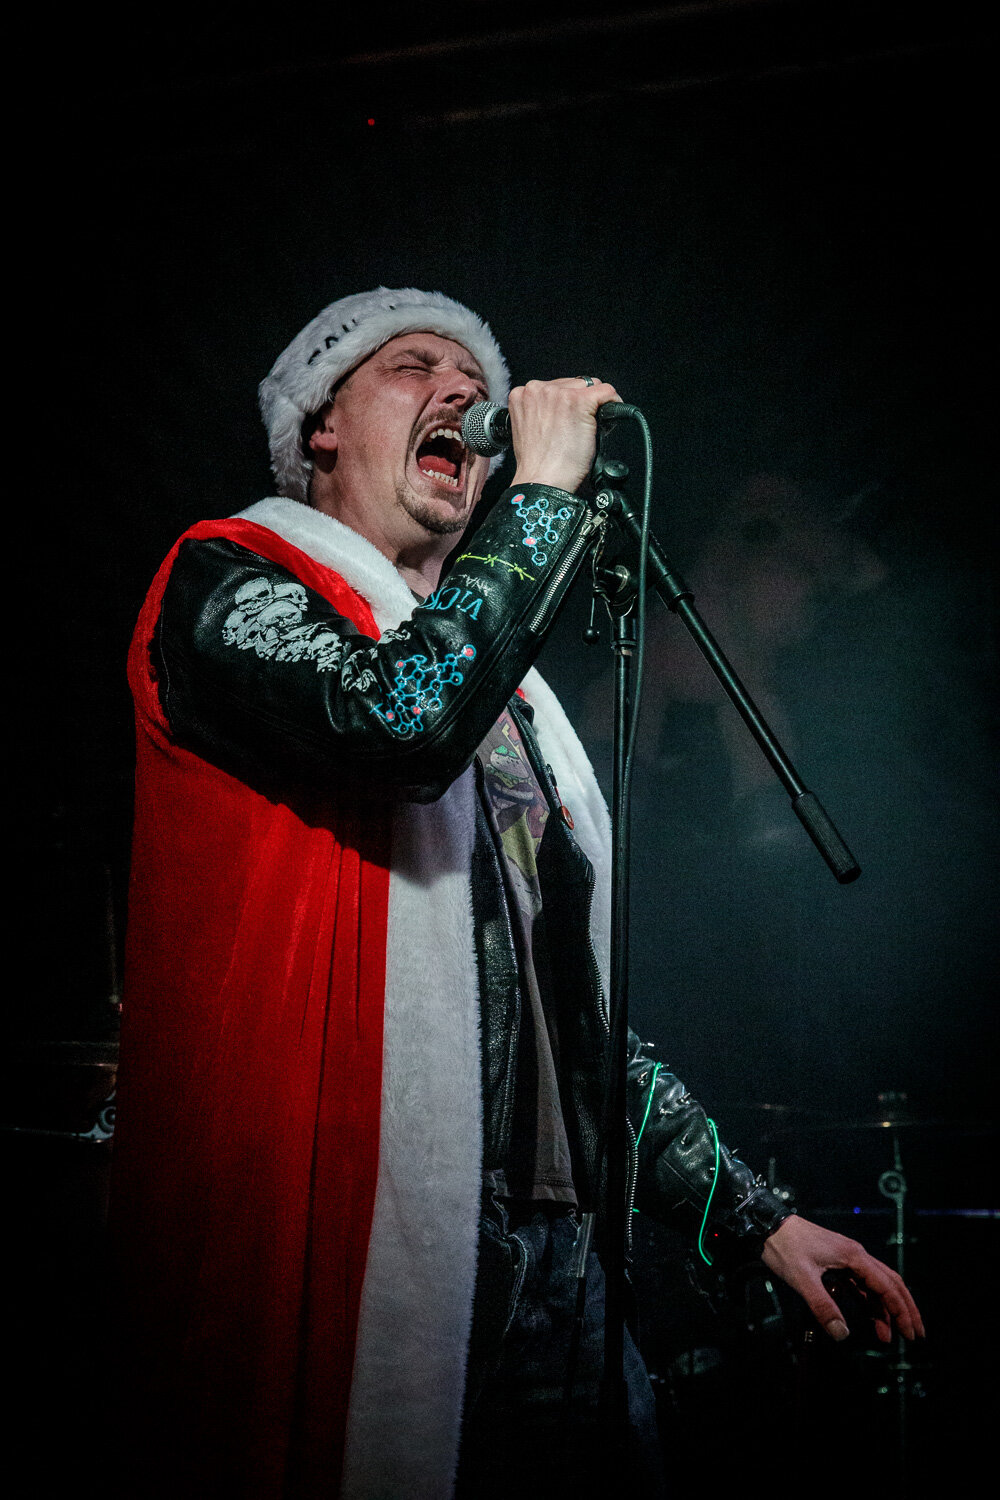 Lullaby For A Unicorn at The Live Rooms in Chester on December 7th 2019 ©Johann Wierzbicki | ROCKFLESH